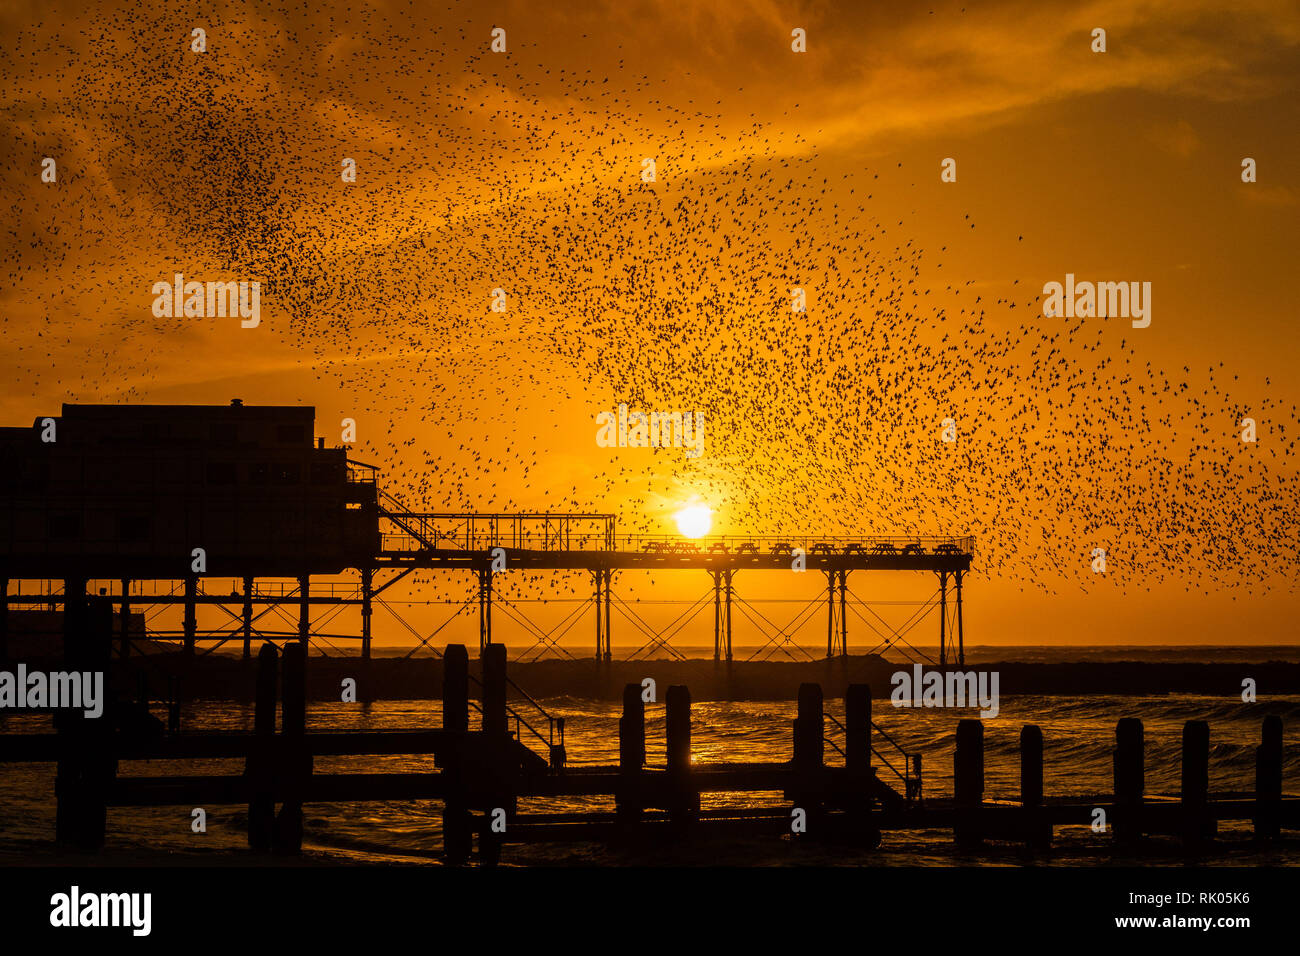 Aberystwyth, Wales, UK. 08 February 2019. UK Weather: At sunset on a windy evening as Storm Erik blows itself out, huge flocks of tens of thousands of starlings (known as ‘adar yr eira' - ‘snow birds' in the welsh language) perform their spectacular ‘murmurations' in the sky as they return from their daily feeding grounds to roost for the night on the forest of cast iron legs underneath Aberystwyth's Victorian seaside pier. Credit: keith morris/Alamy Live News Stock Photo